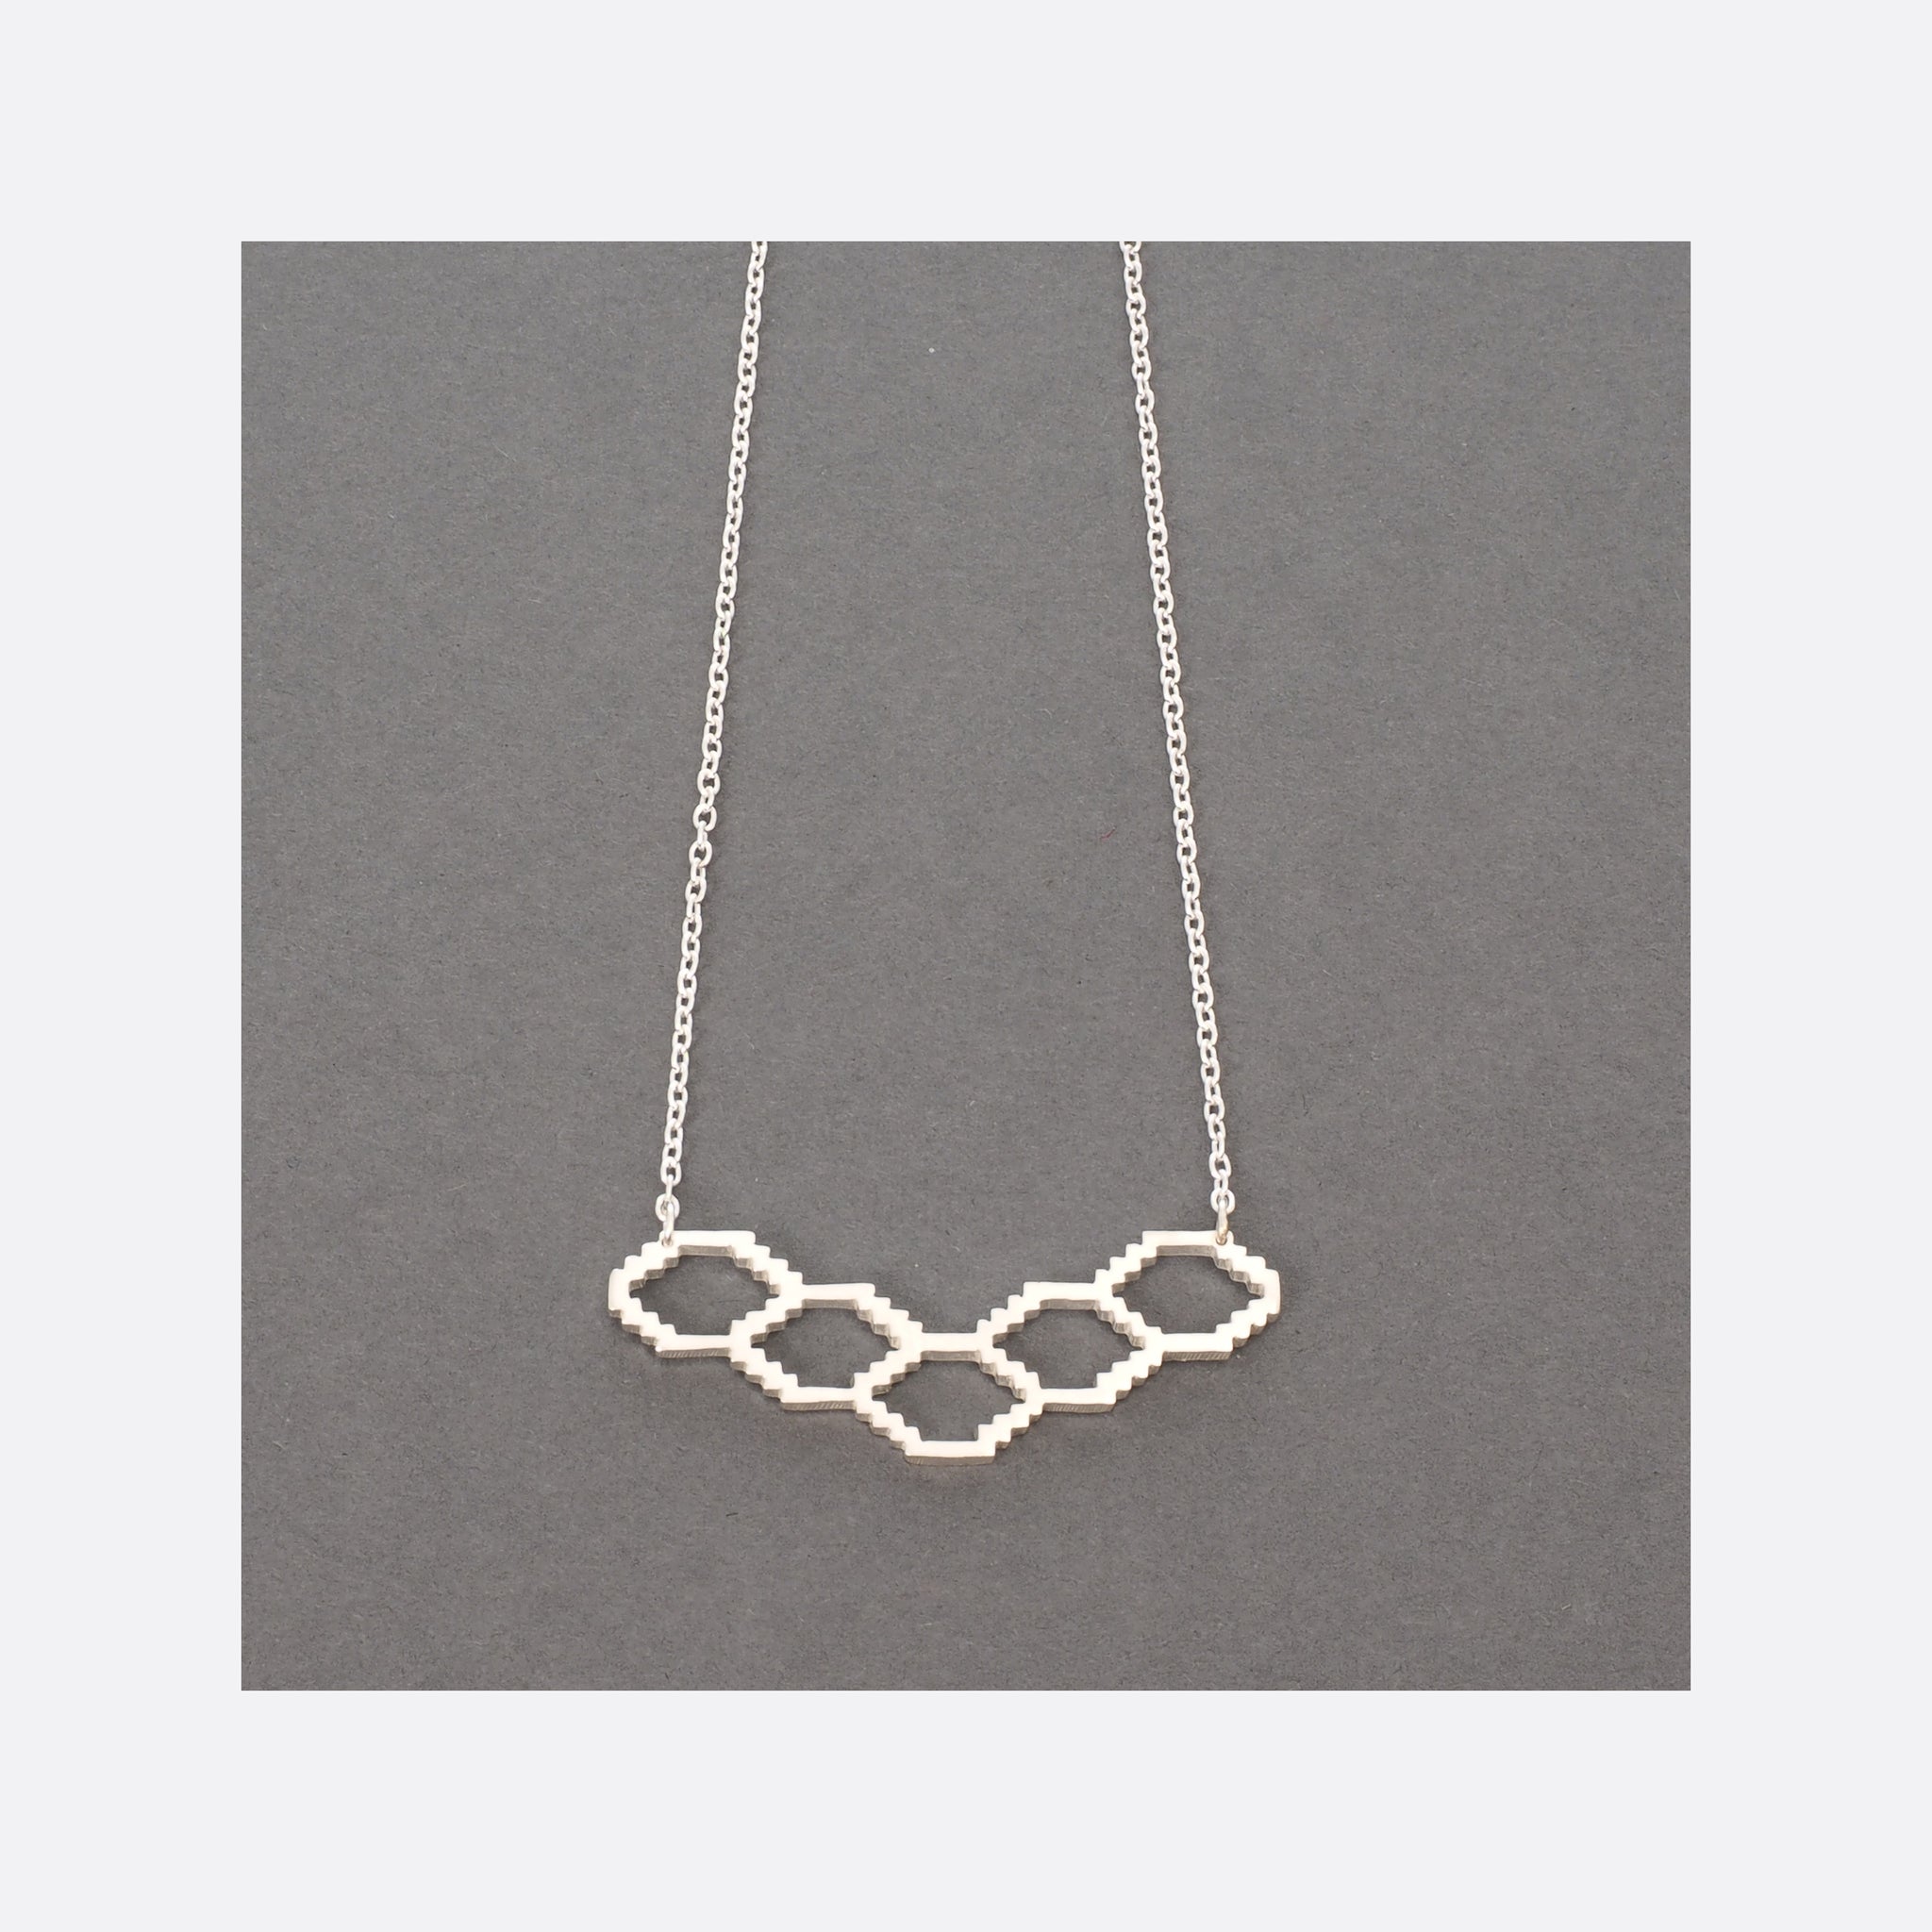 Homage To Dhaka N°1 – Small Silver Necklace